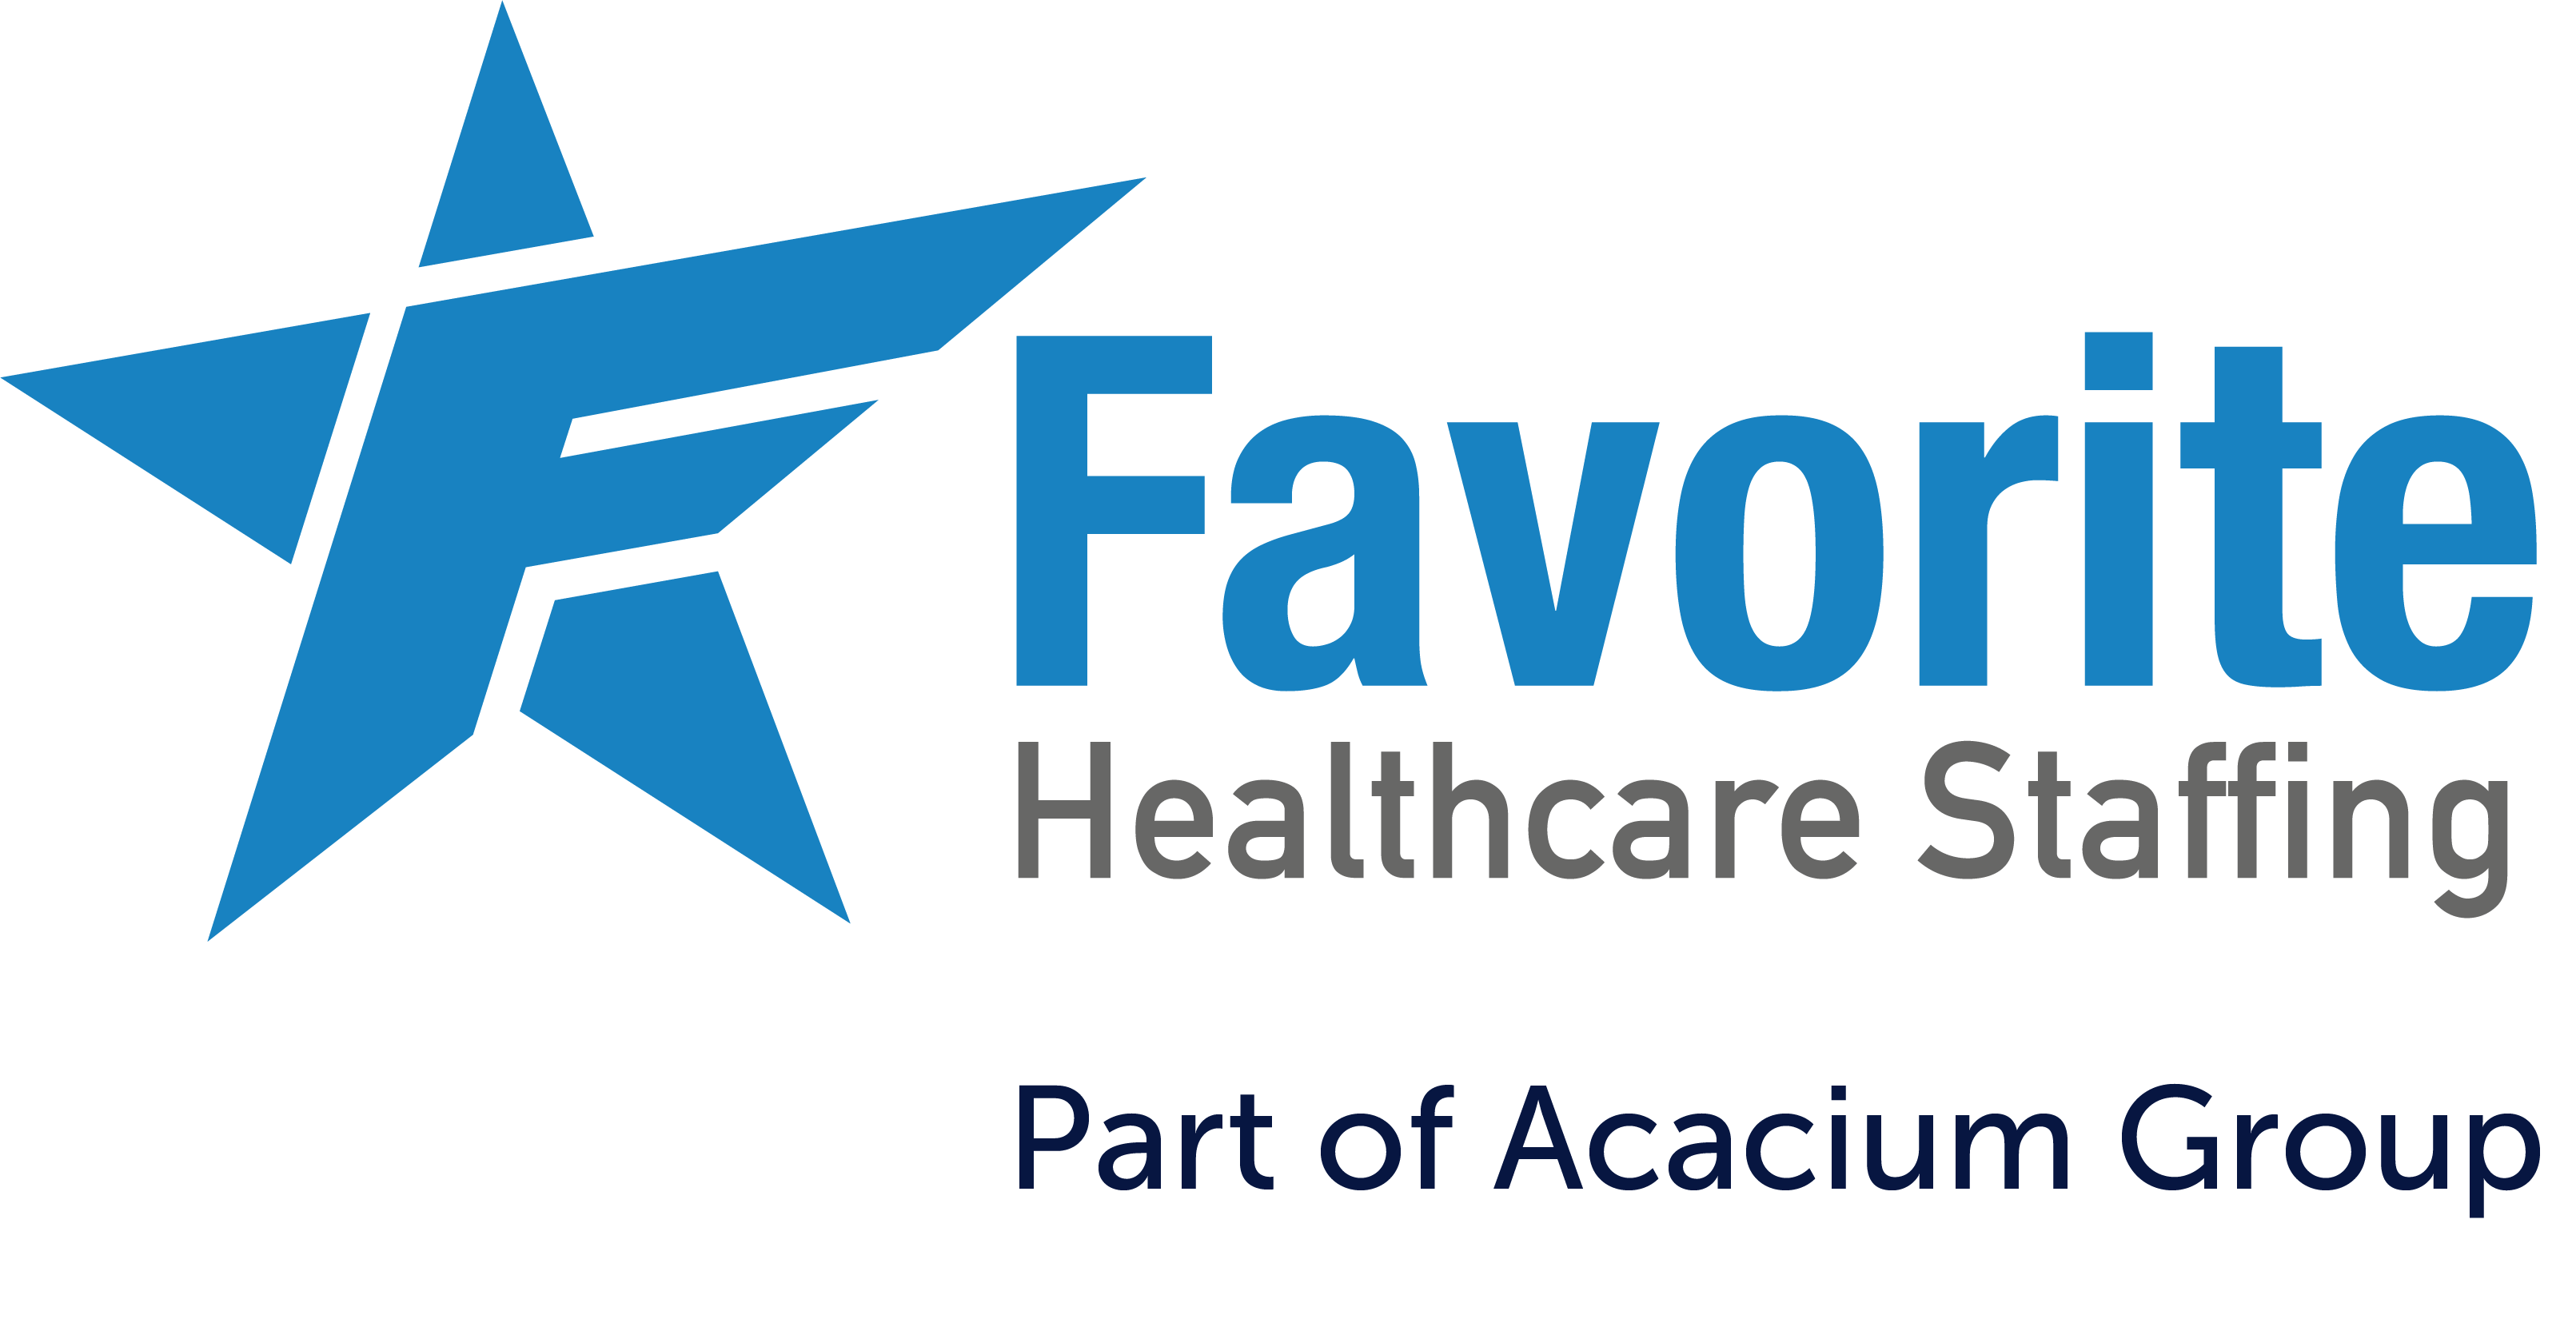 Favorite Healthcare Staffing Joins Acacium Group to Become First Global Healthcare Staffing & Workforce Solutions Specialist